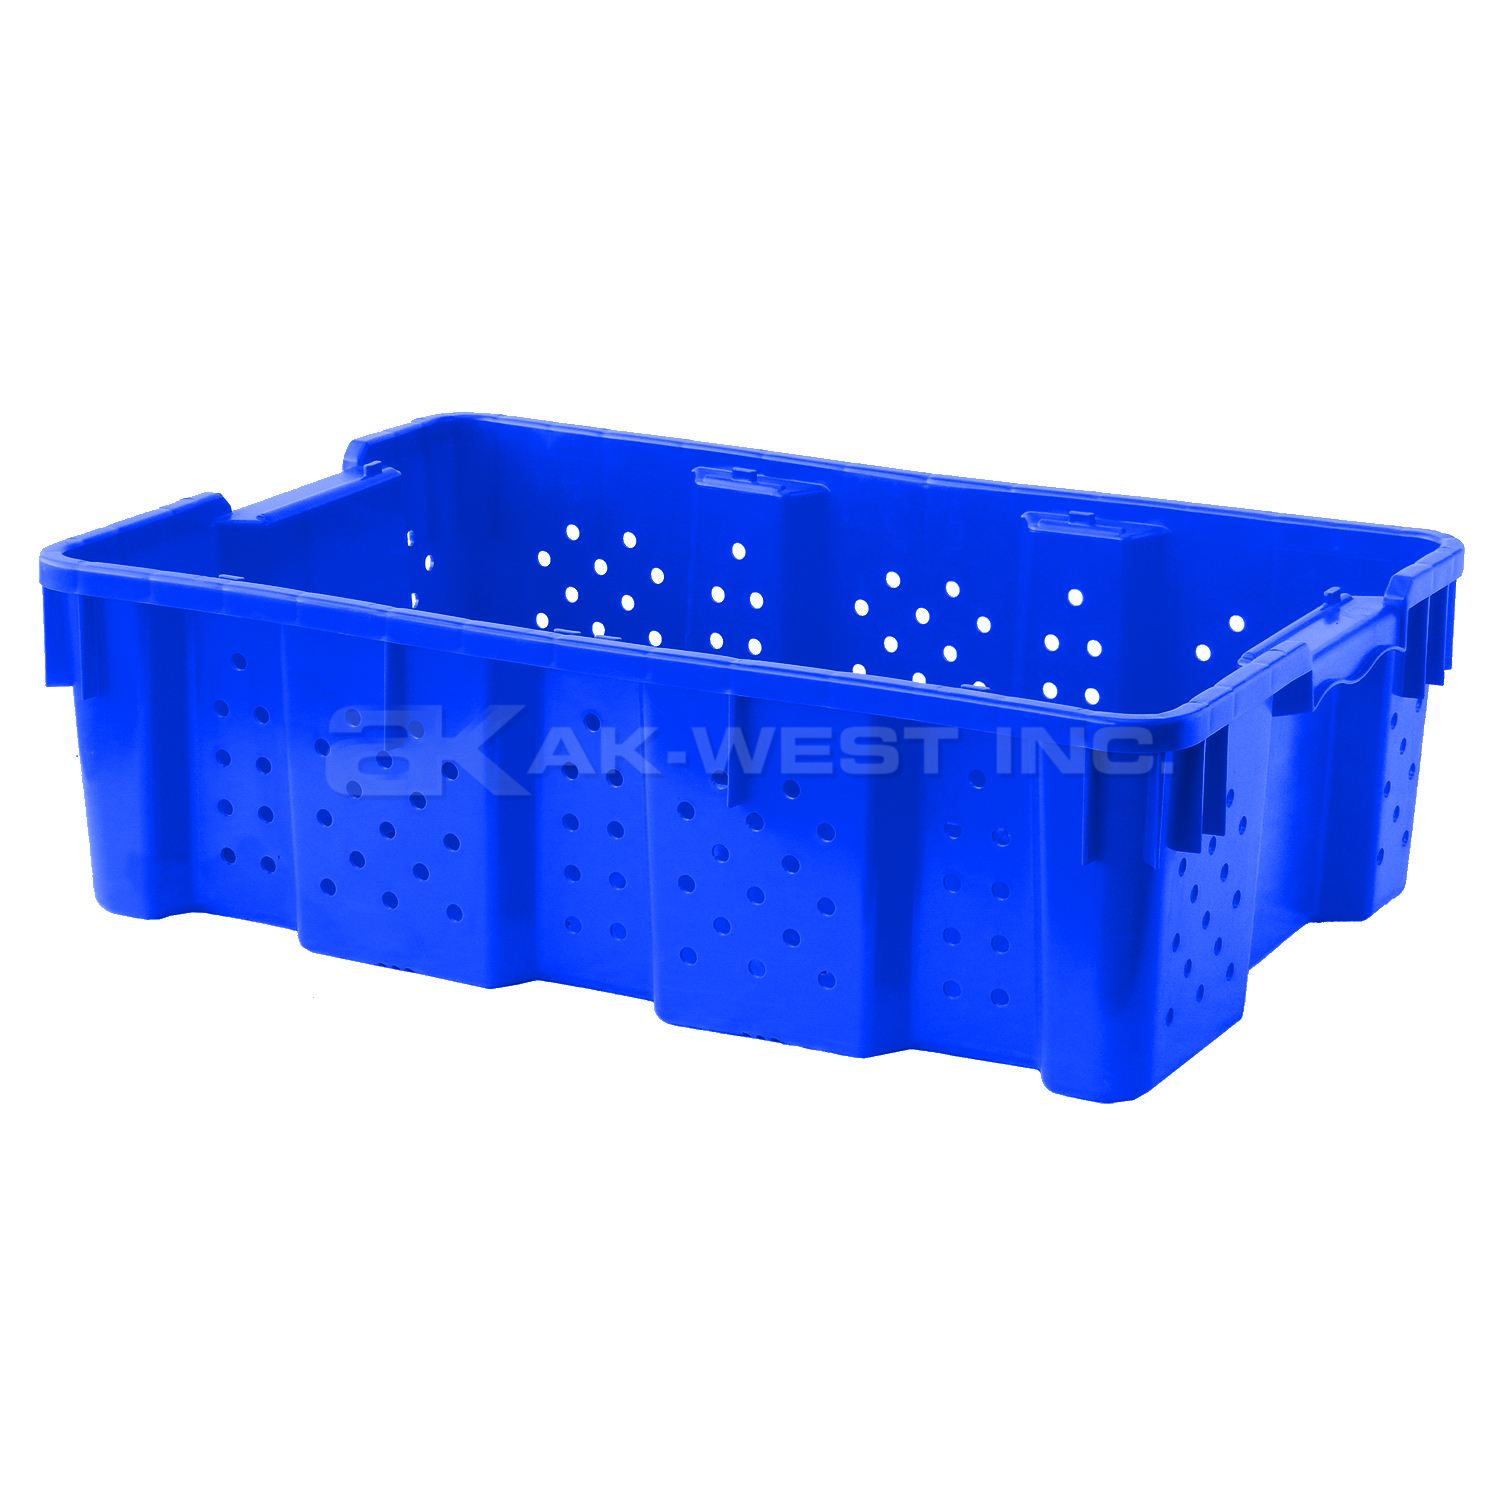 Blue, 24"L x 16"W x 7"H Stack and Nest Container w/ Vented Sides and Base